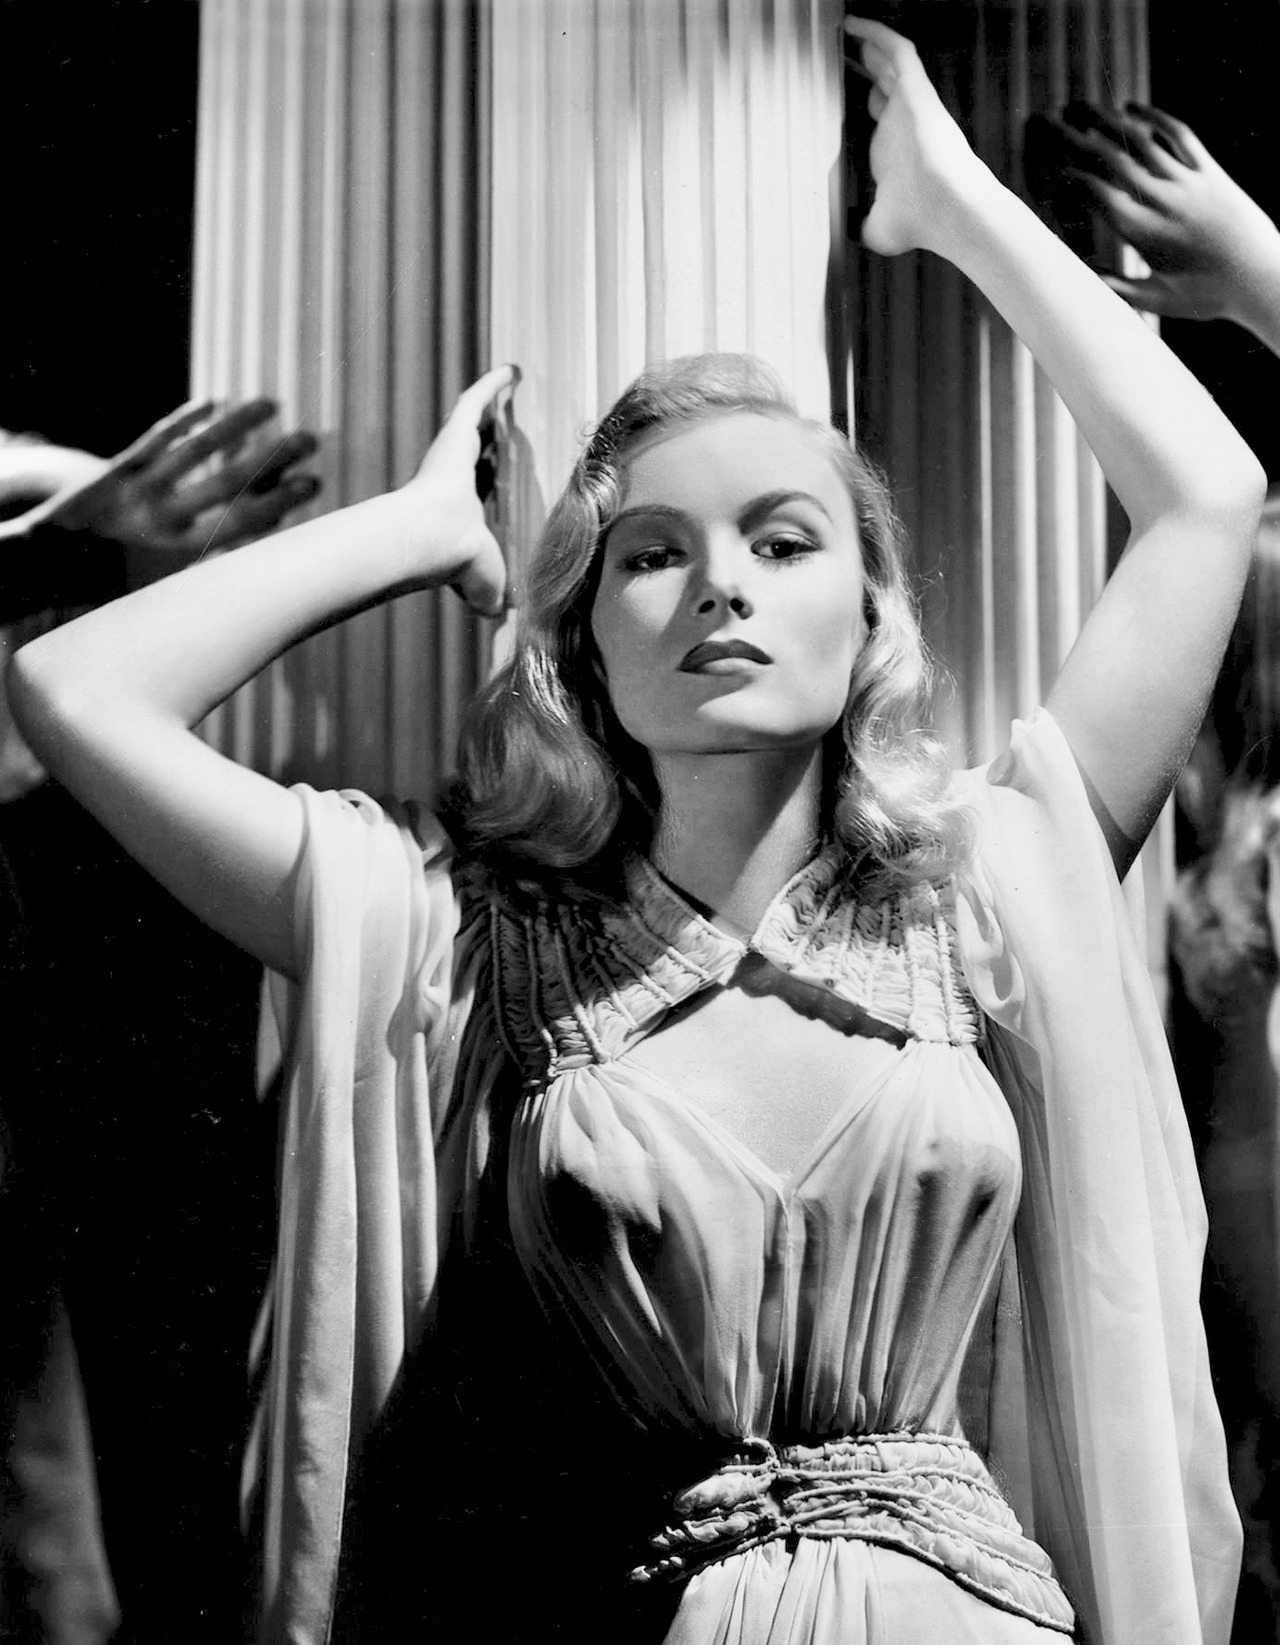 summers-in-hollywood:
“Veronica Lake, 1940
”